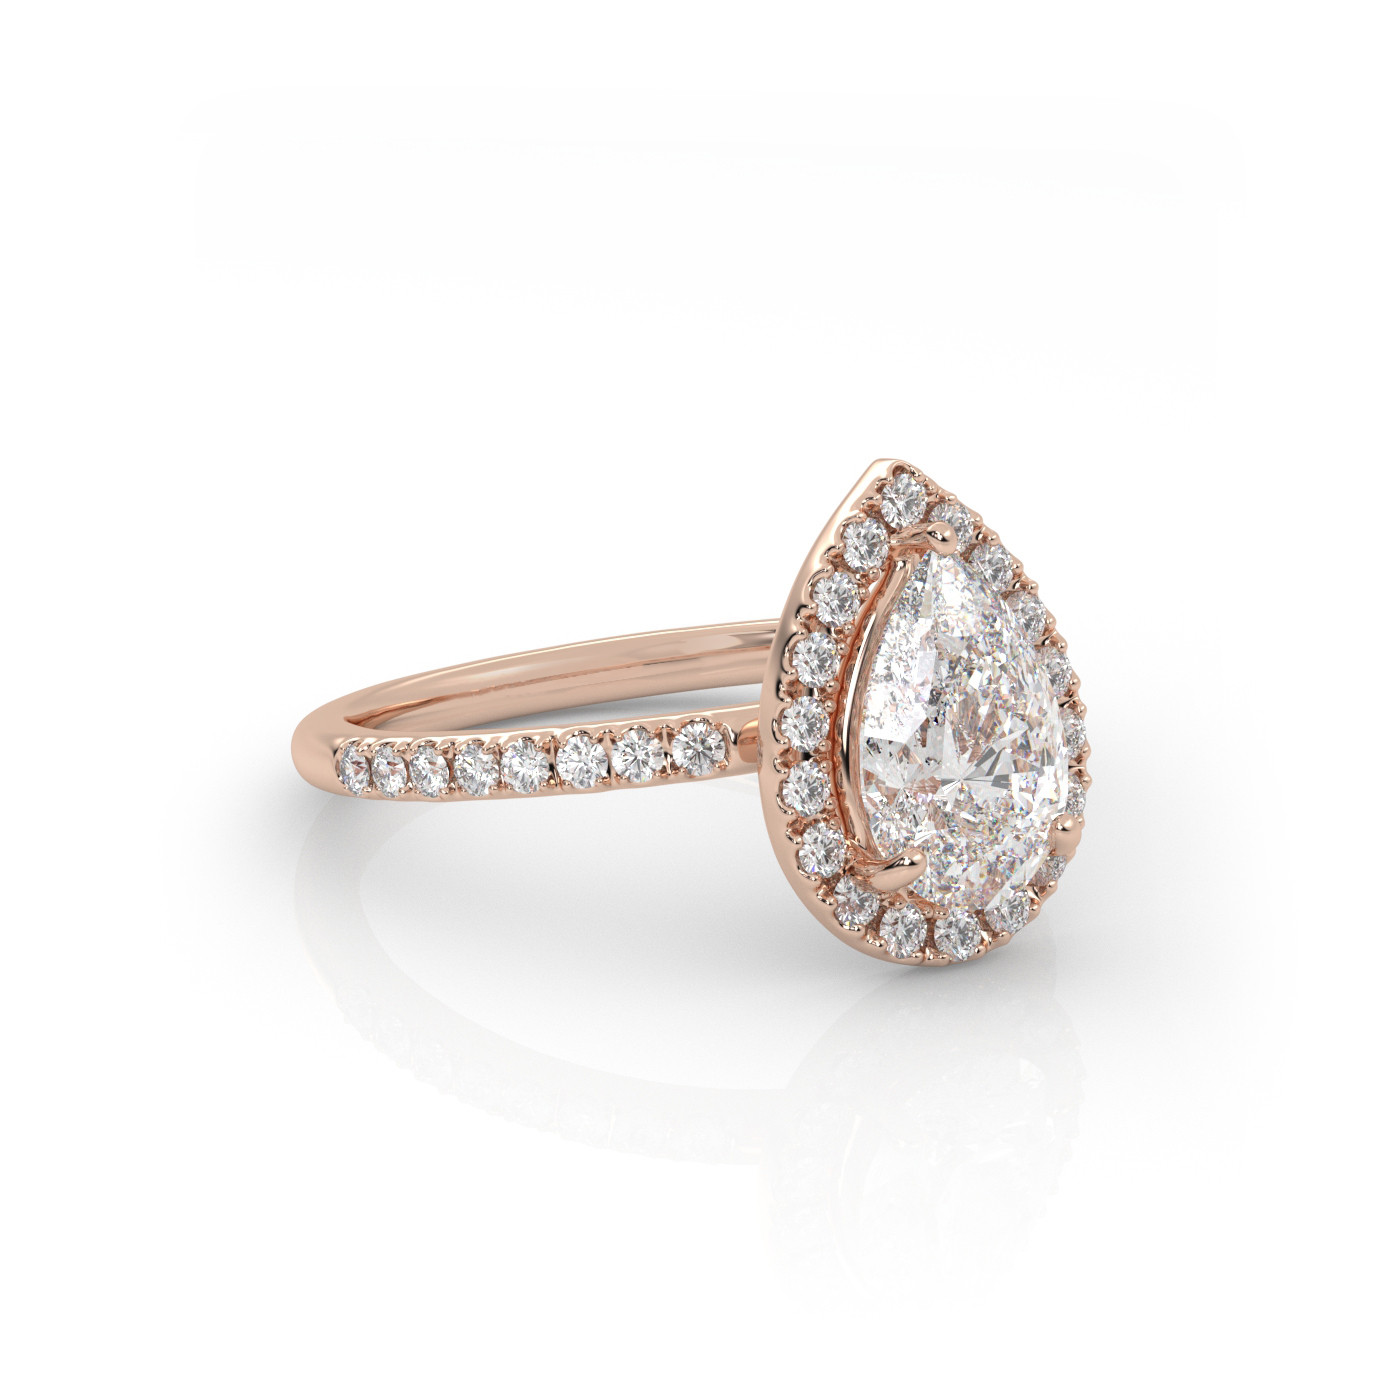 18K ROSE GOLD Pear Shaped Diamond Engagament Ring with Halo and Pave style